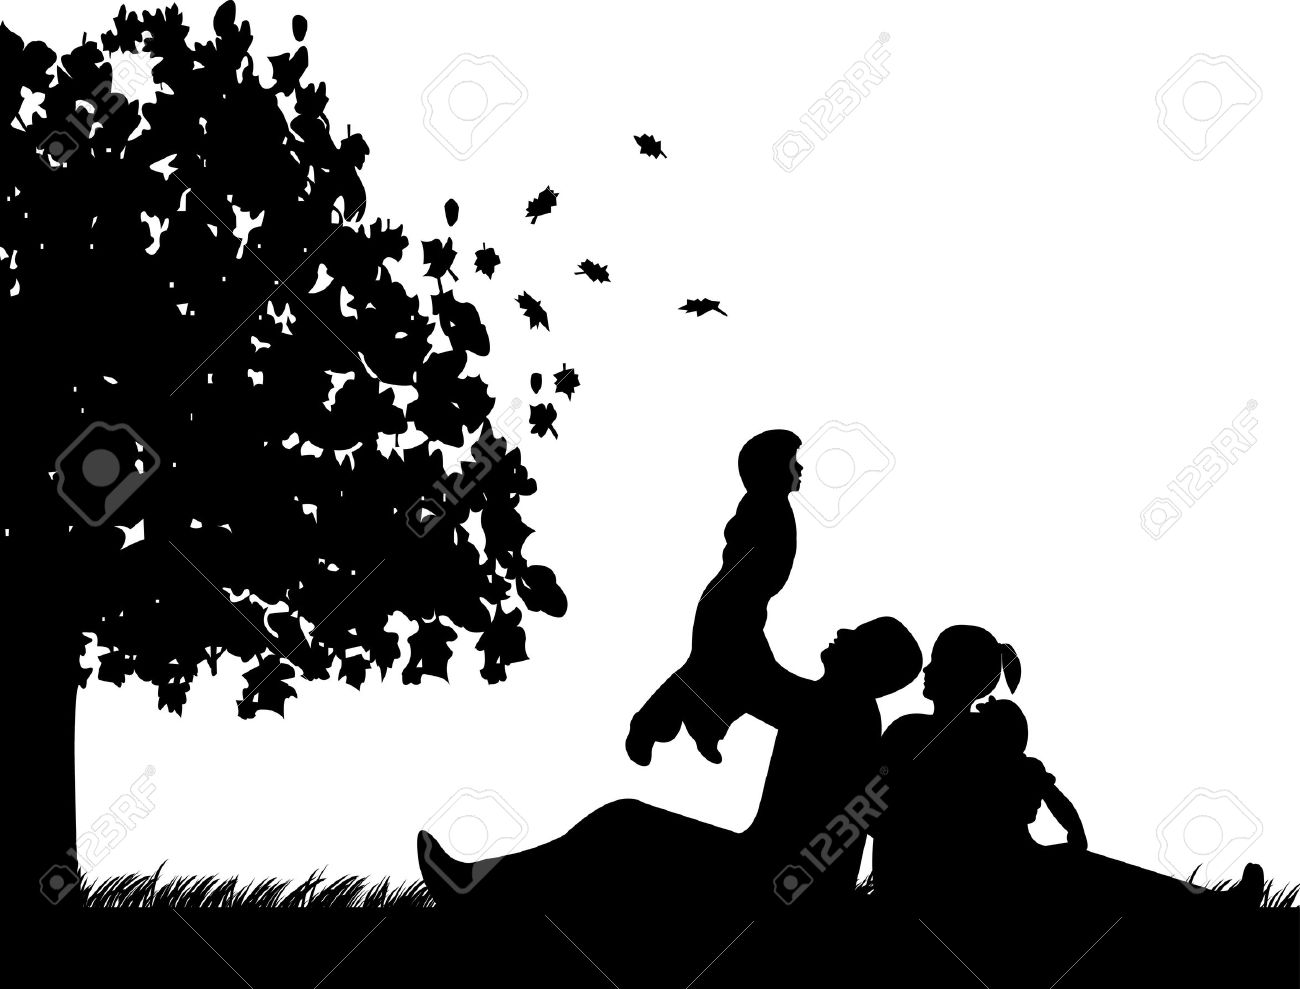 Family picnic in park in autumn or fall under the tree silhouette Stock  Vector - 14800053